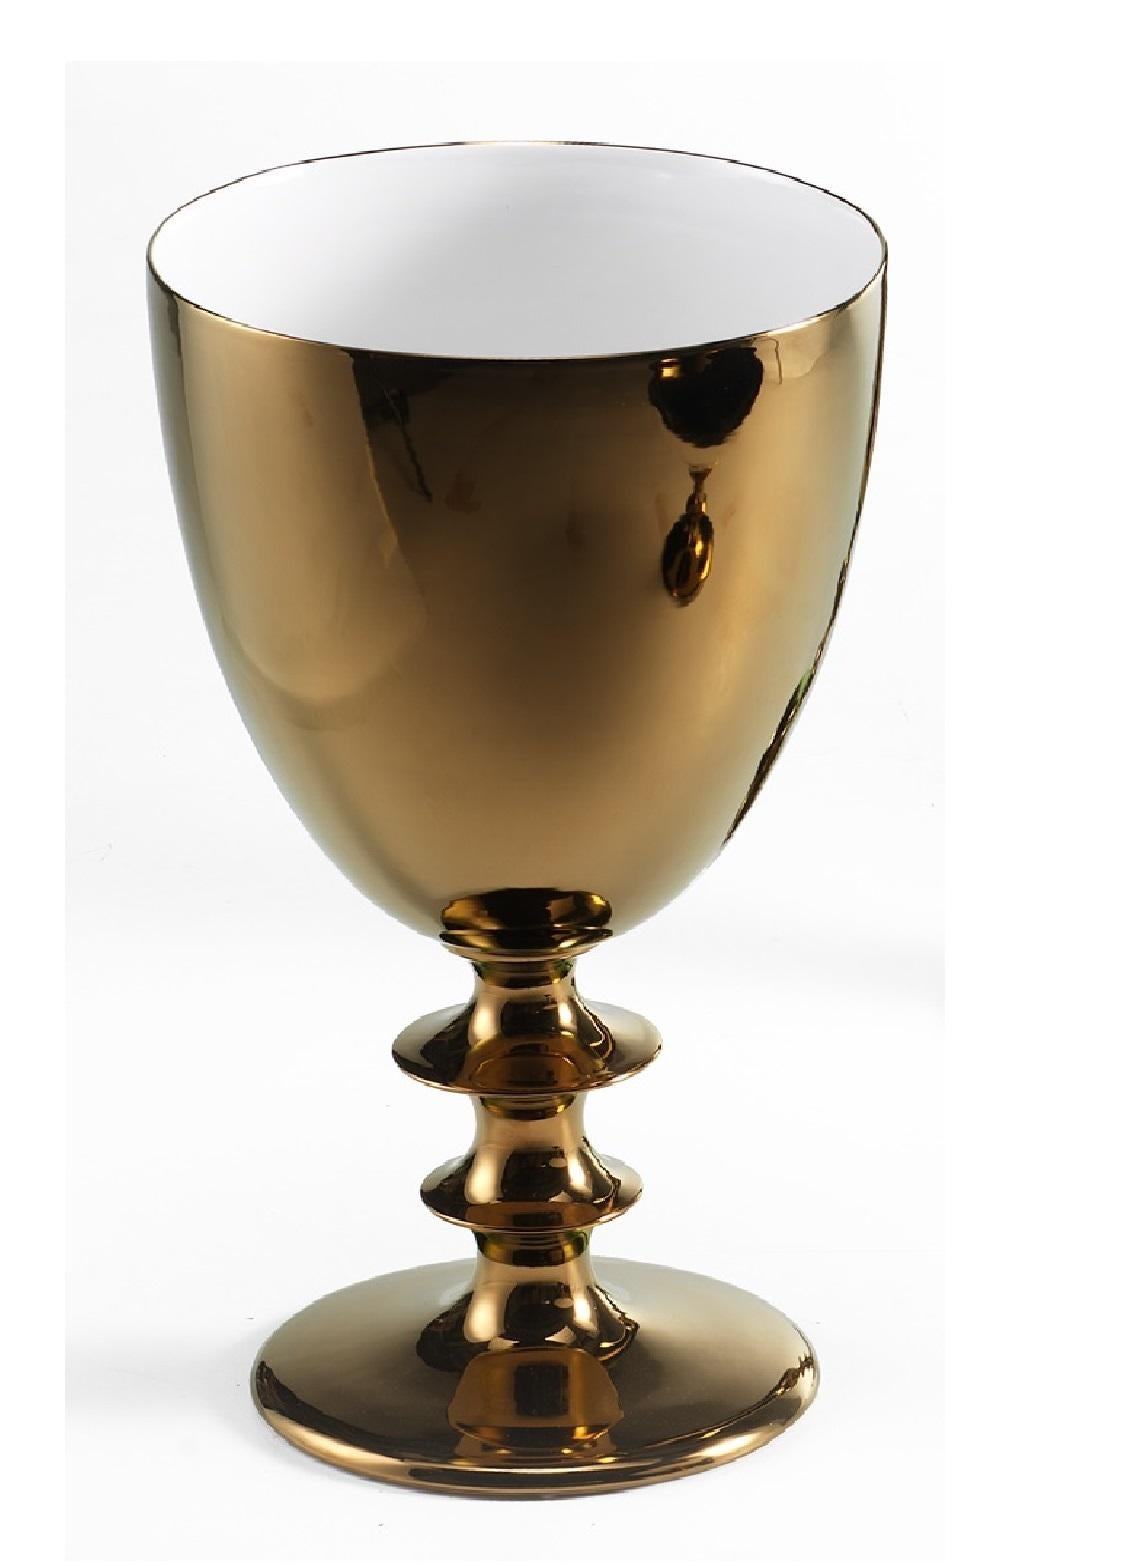 Ceramic cup MARY II
cod. CP114 
handcrafted in bronze 
with white enamel inside

measures:
Height 70.0 cm.
diameter 35.0 cm.